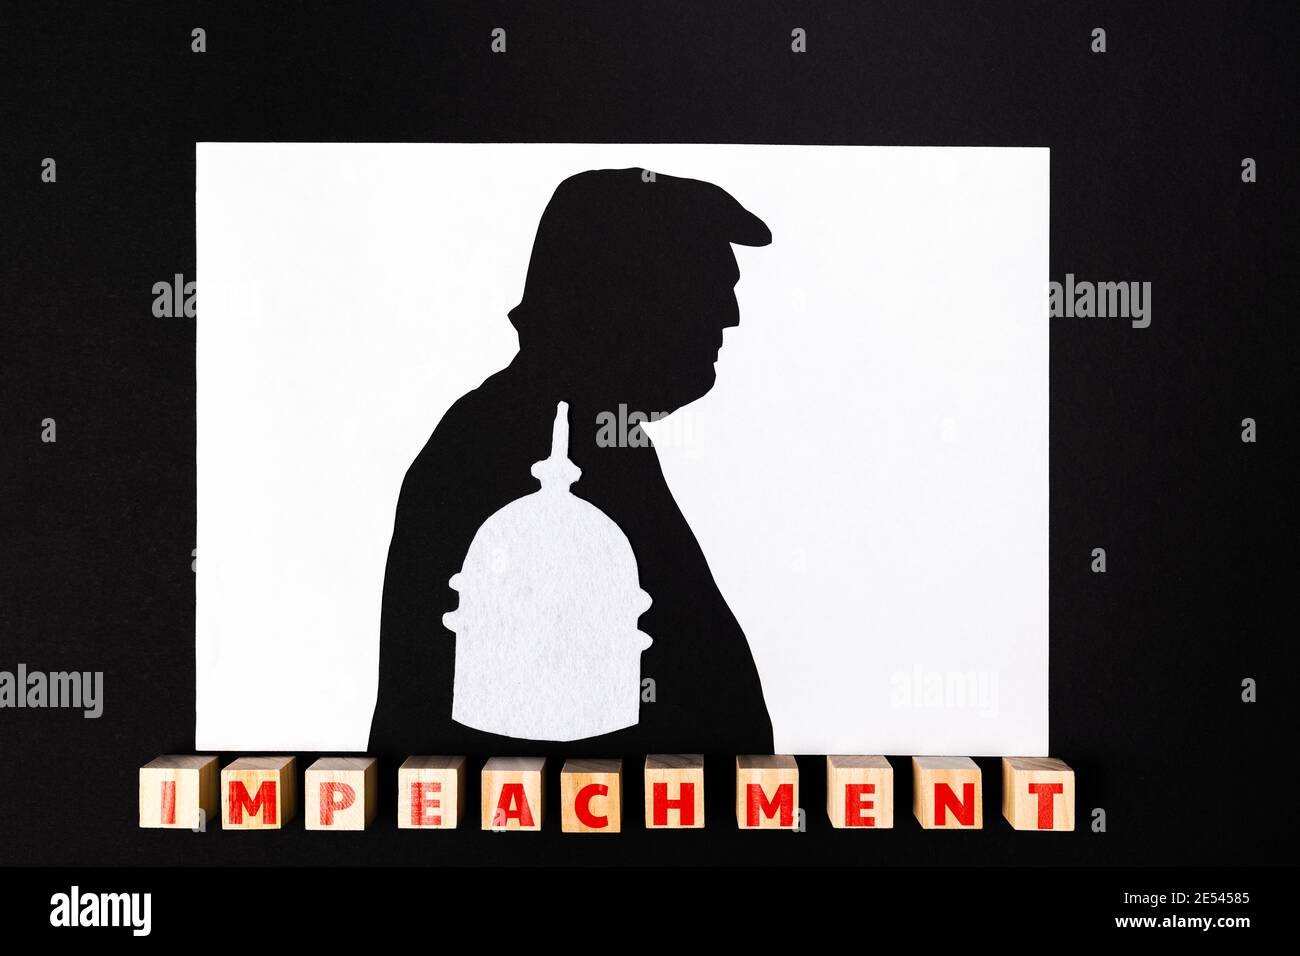 17.01.2021, Moscow, Russia. The concept of impeachment. Silhouette of the former president of the USA on a black and white background. Inside the silh Stock Photo